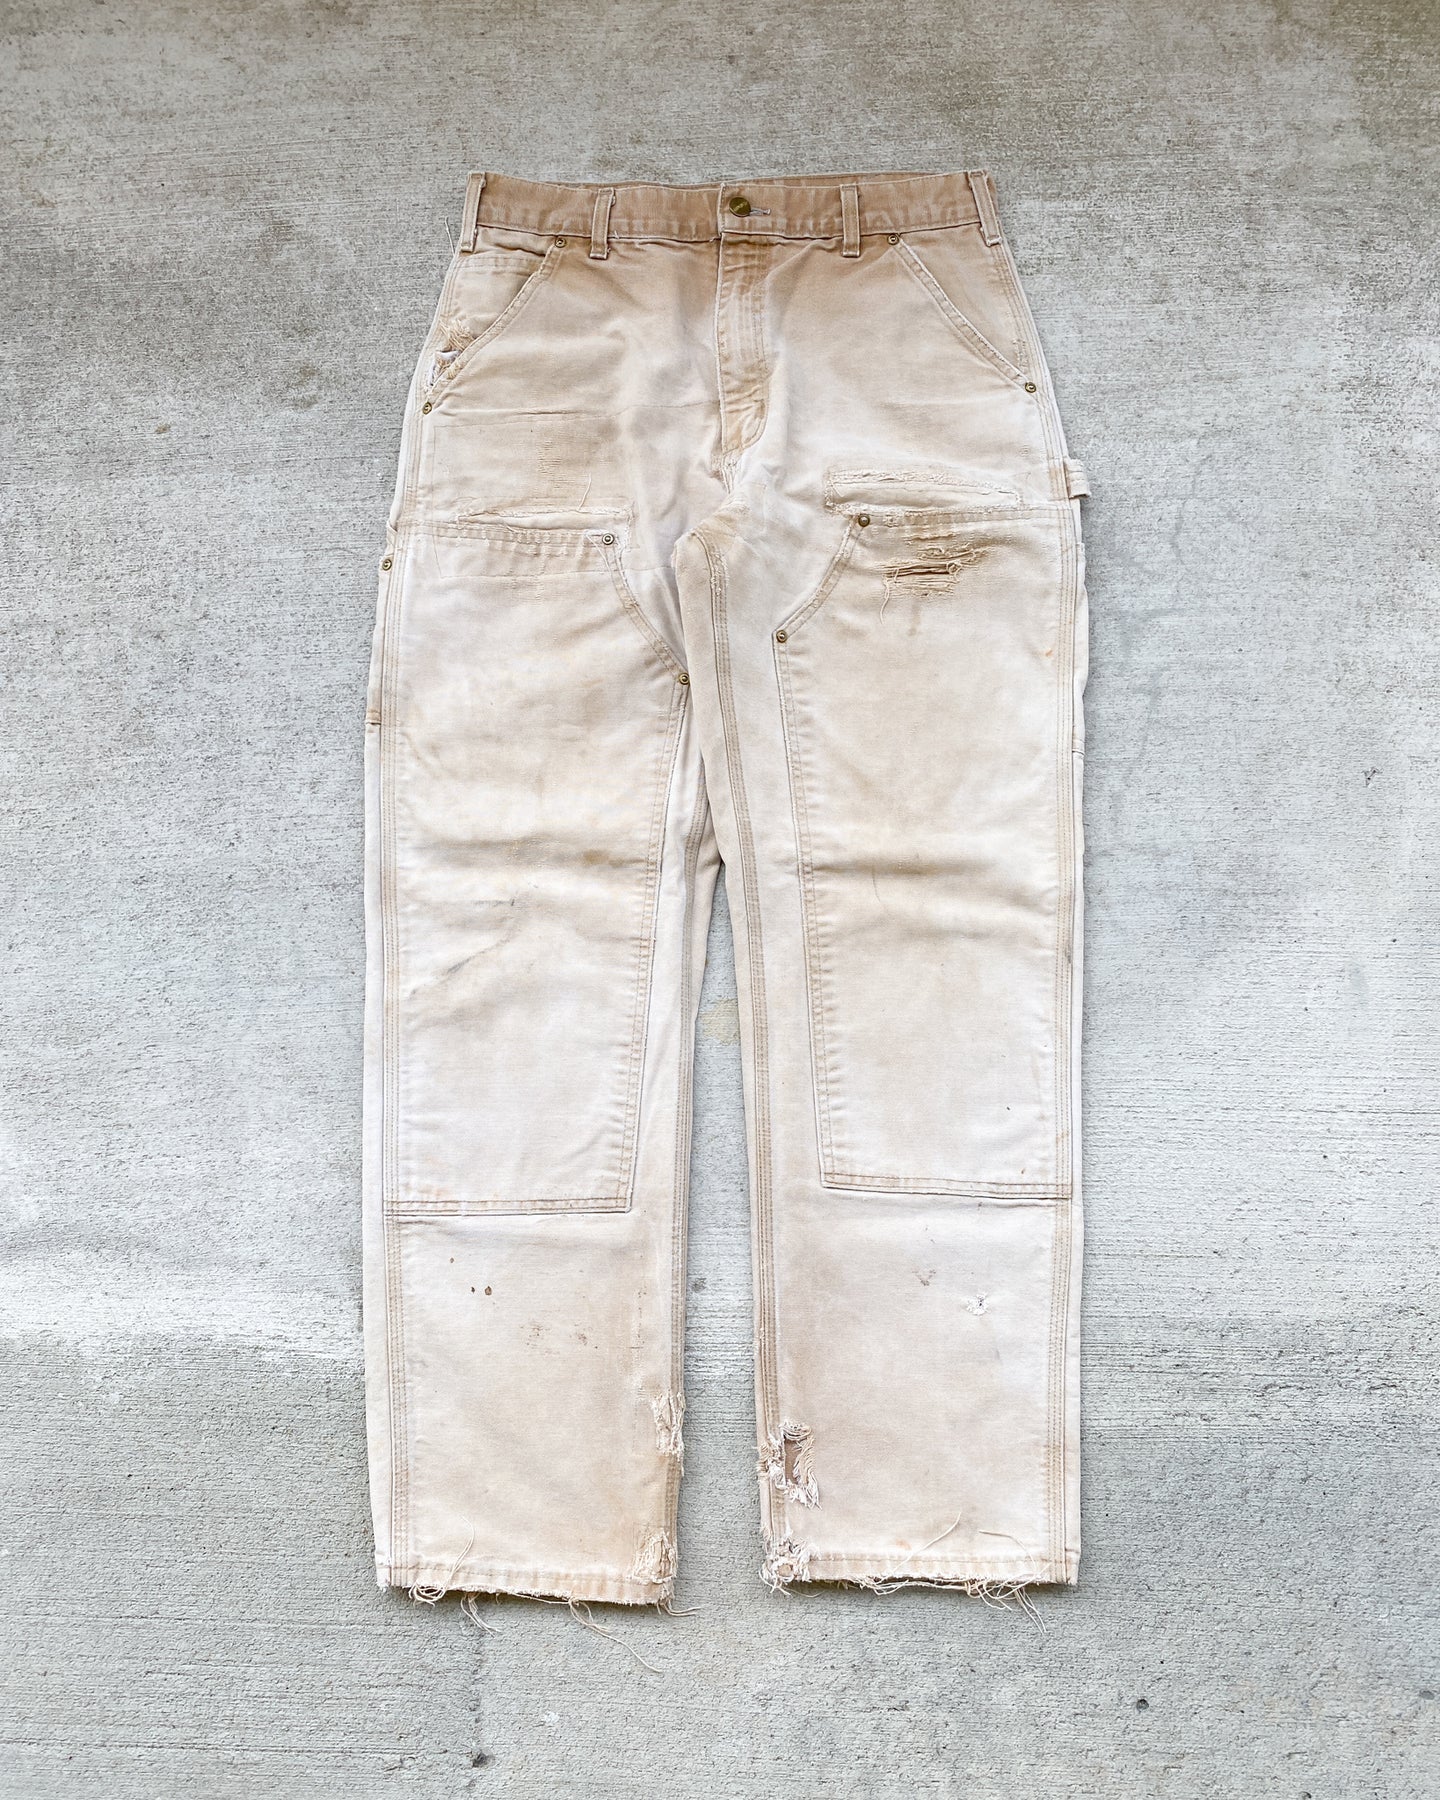 1990s Carhartt Sun Bleached and Heavily Repaired Double Knee Pants - Size 32 x 31